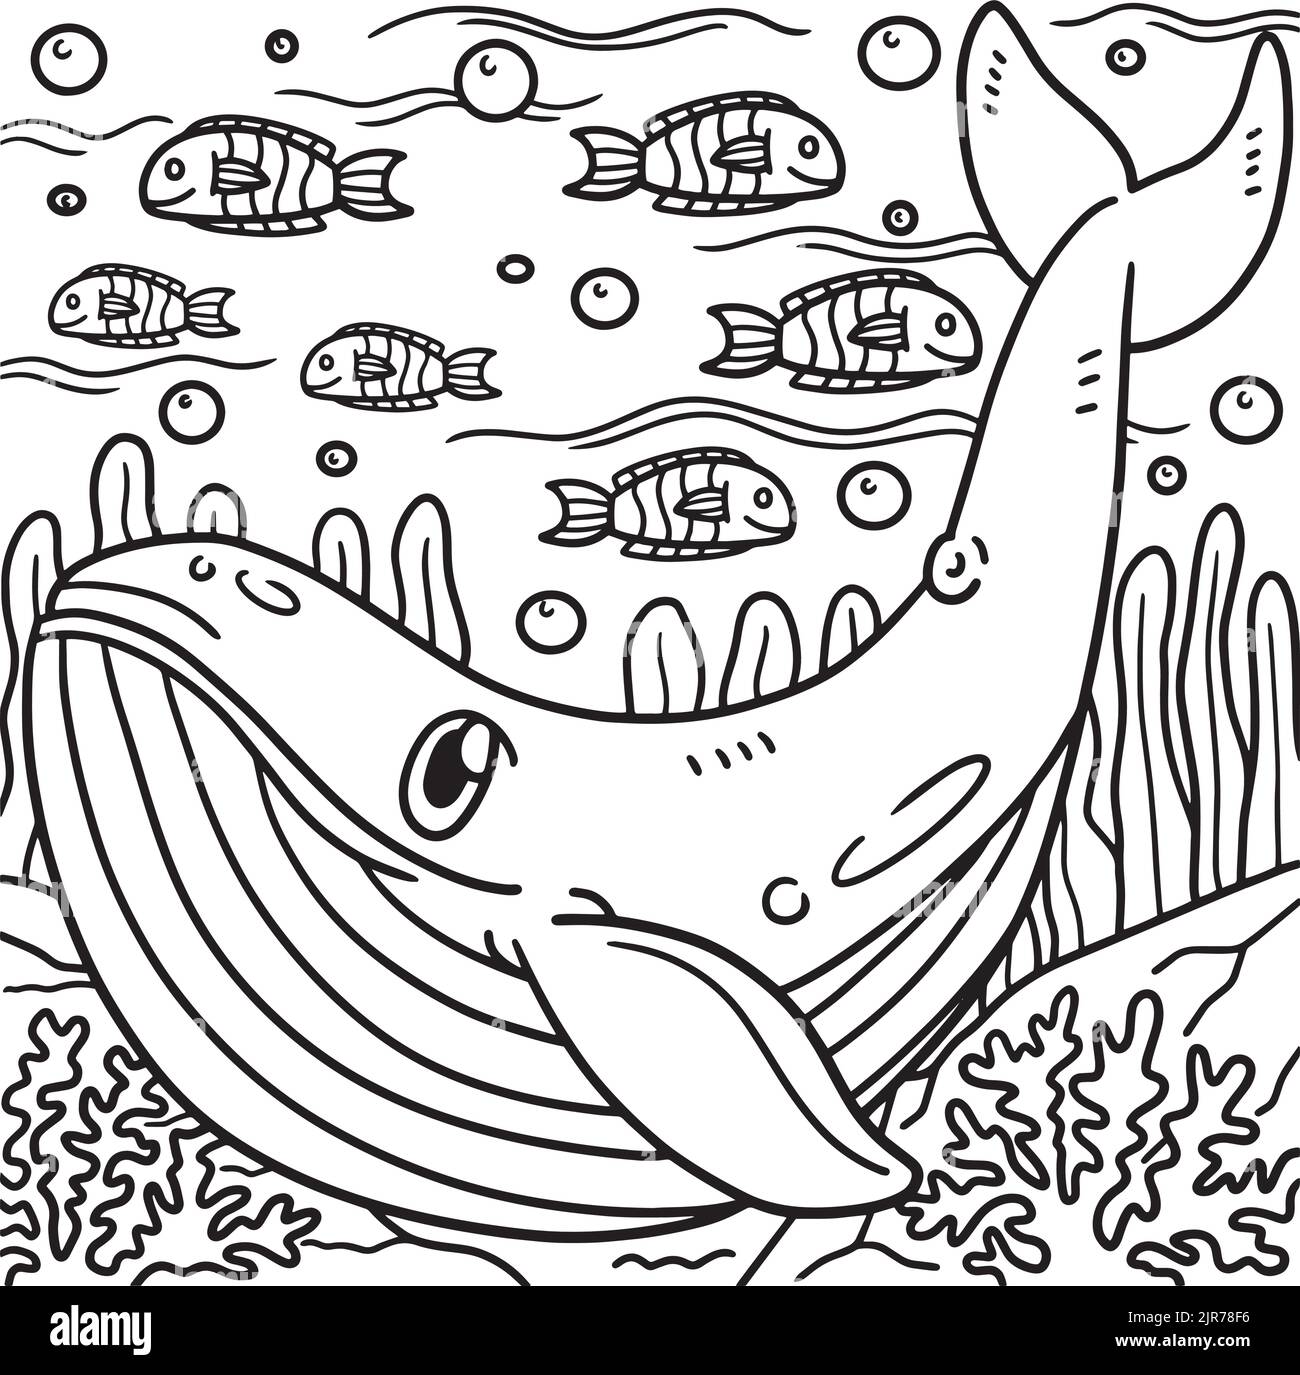 Blue Whale Coloring Page for Kids Stock Vector